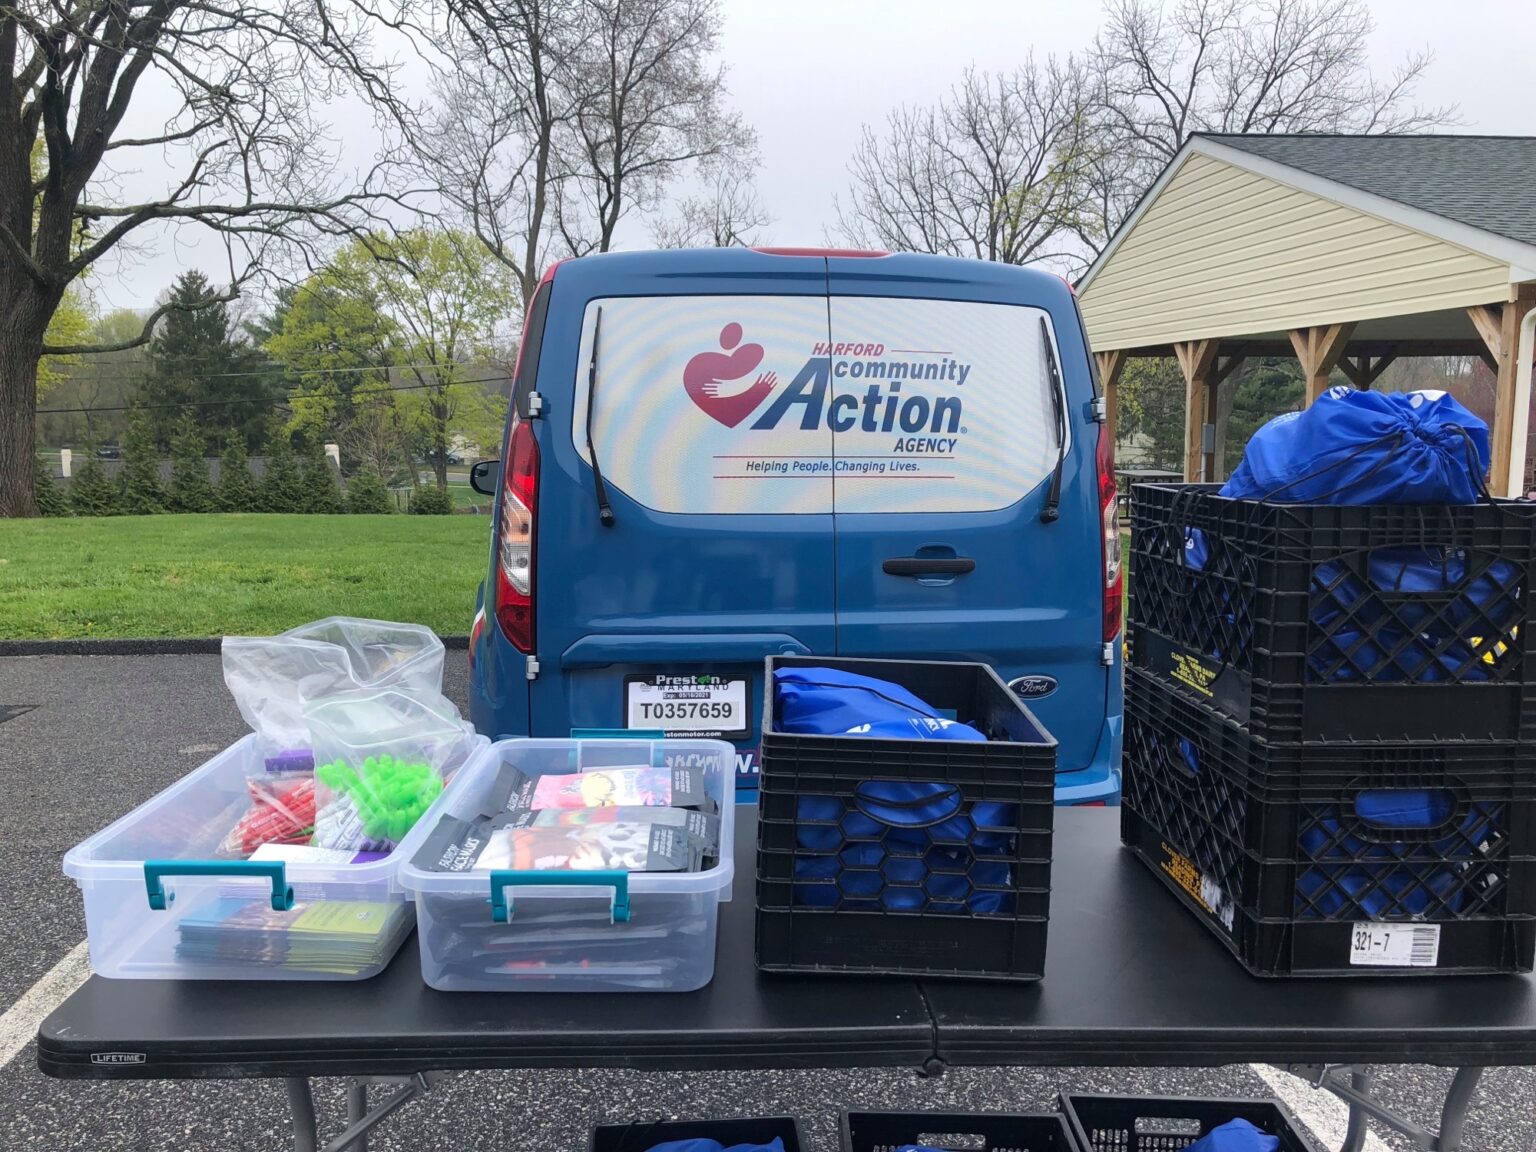 Mobile Pantry Locations September 2021 Harford Community Action Agency